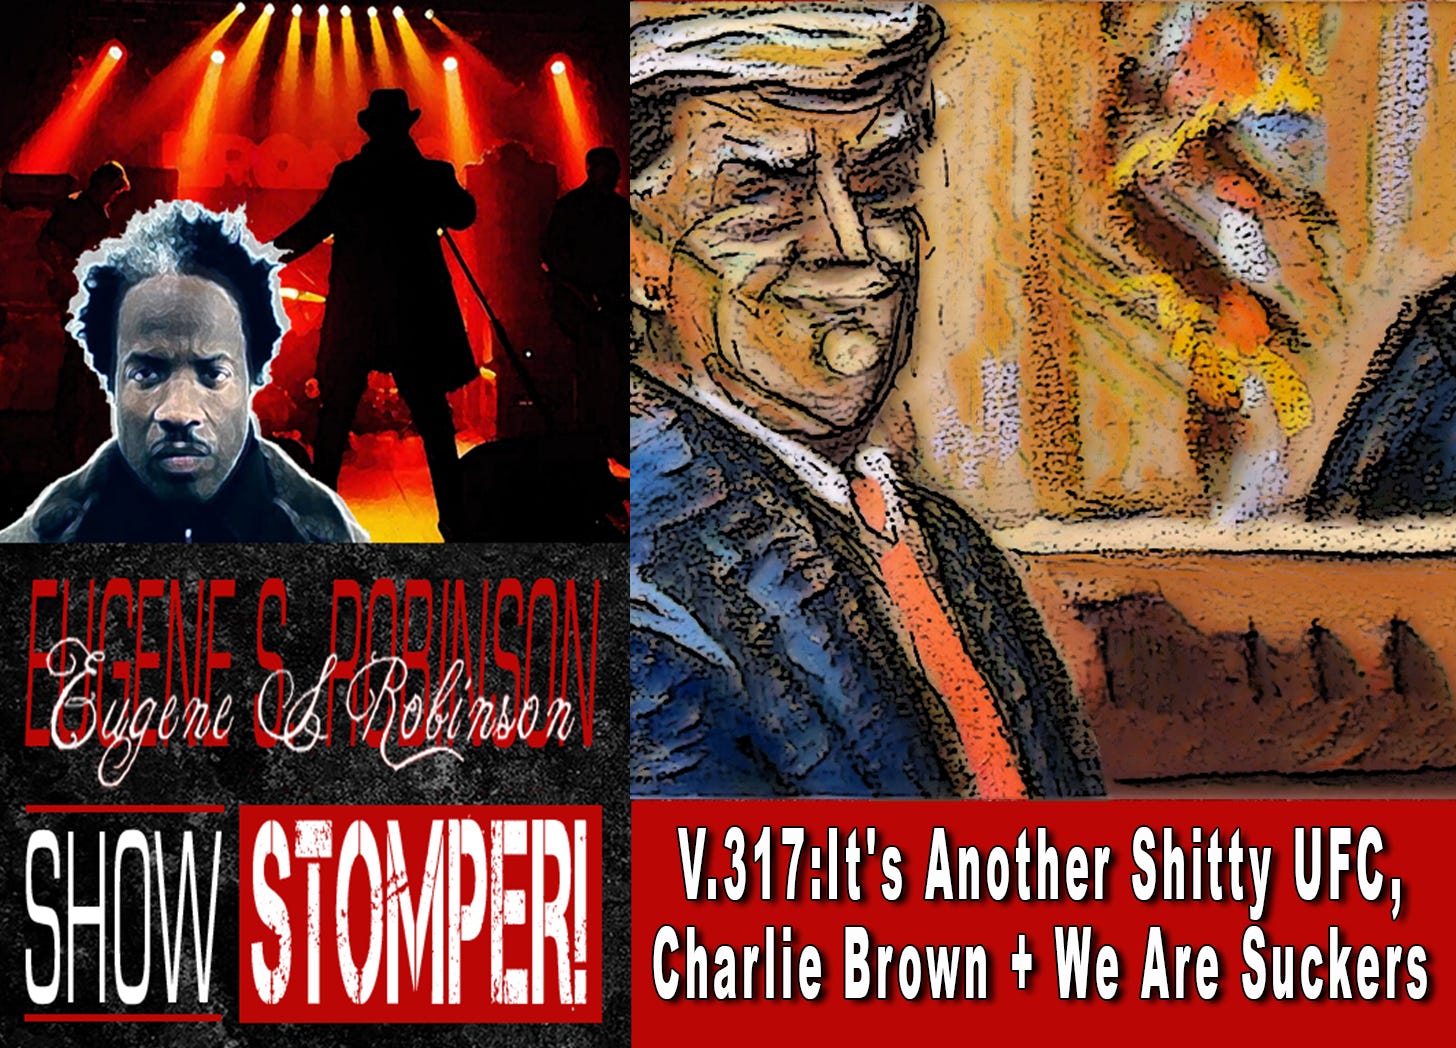 V.317: It's Another Shitty UFC, Charlie Brown + We Are Suckers On The Eugene S. Robinson Show Stomper!